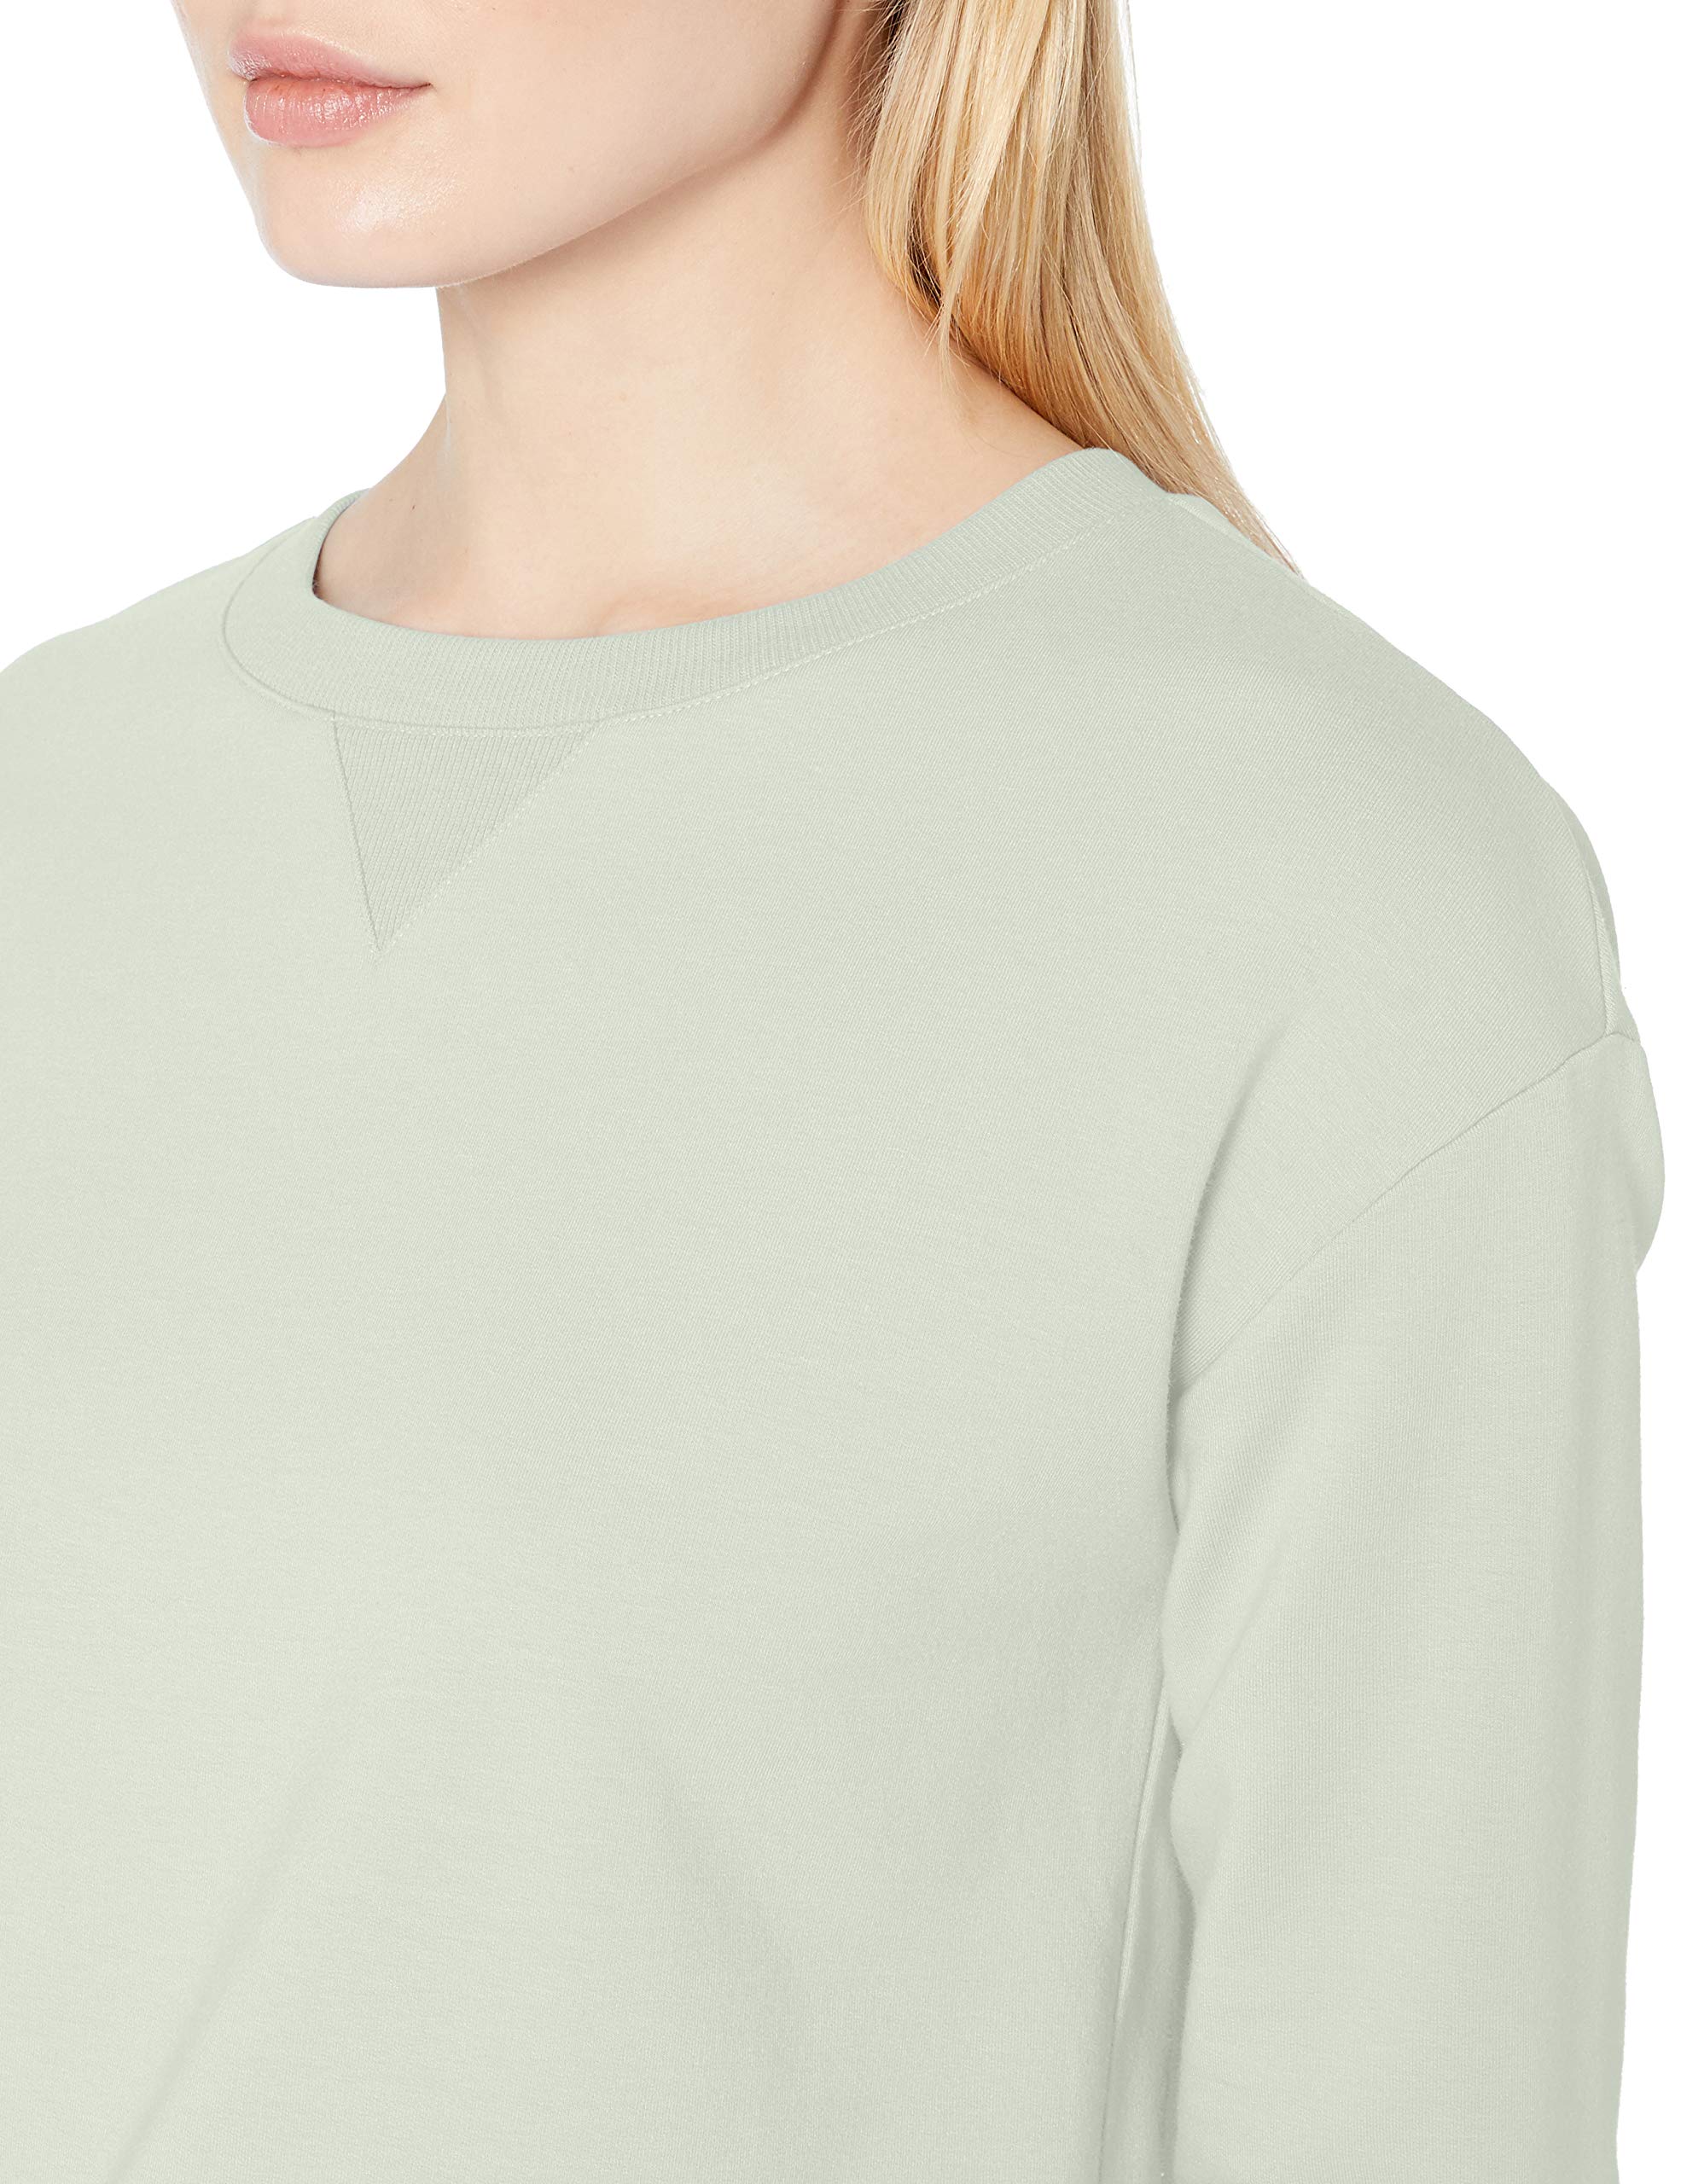 Daily Ritual Women's Terry Cotton and Modal Oversized-Fit Long-Sleeve Crewneck Sweatshirt, Light Green, Large